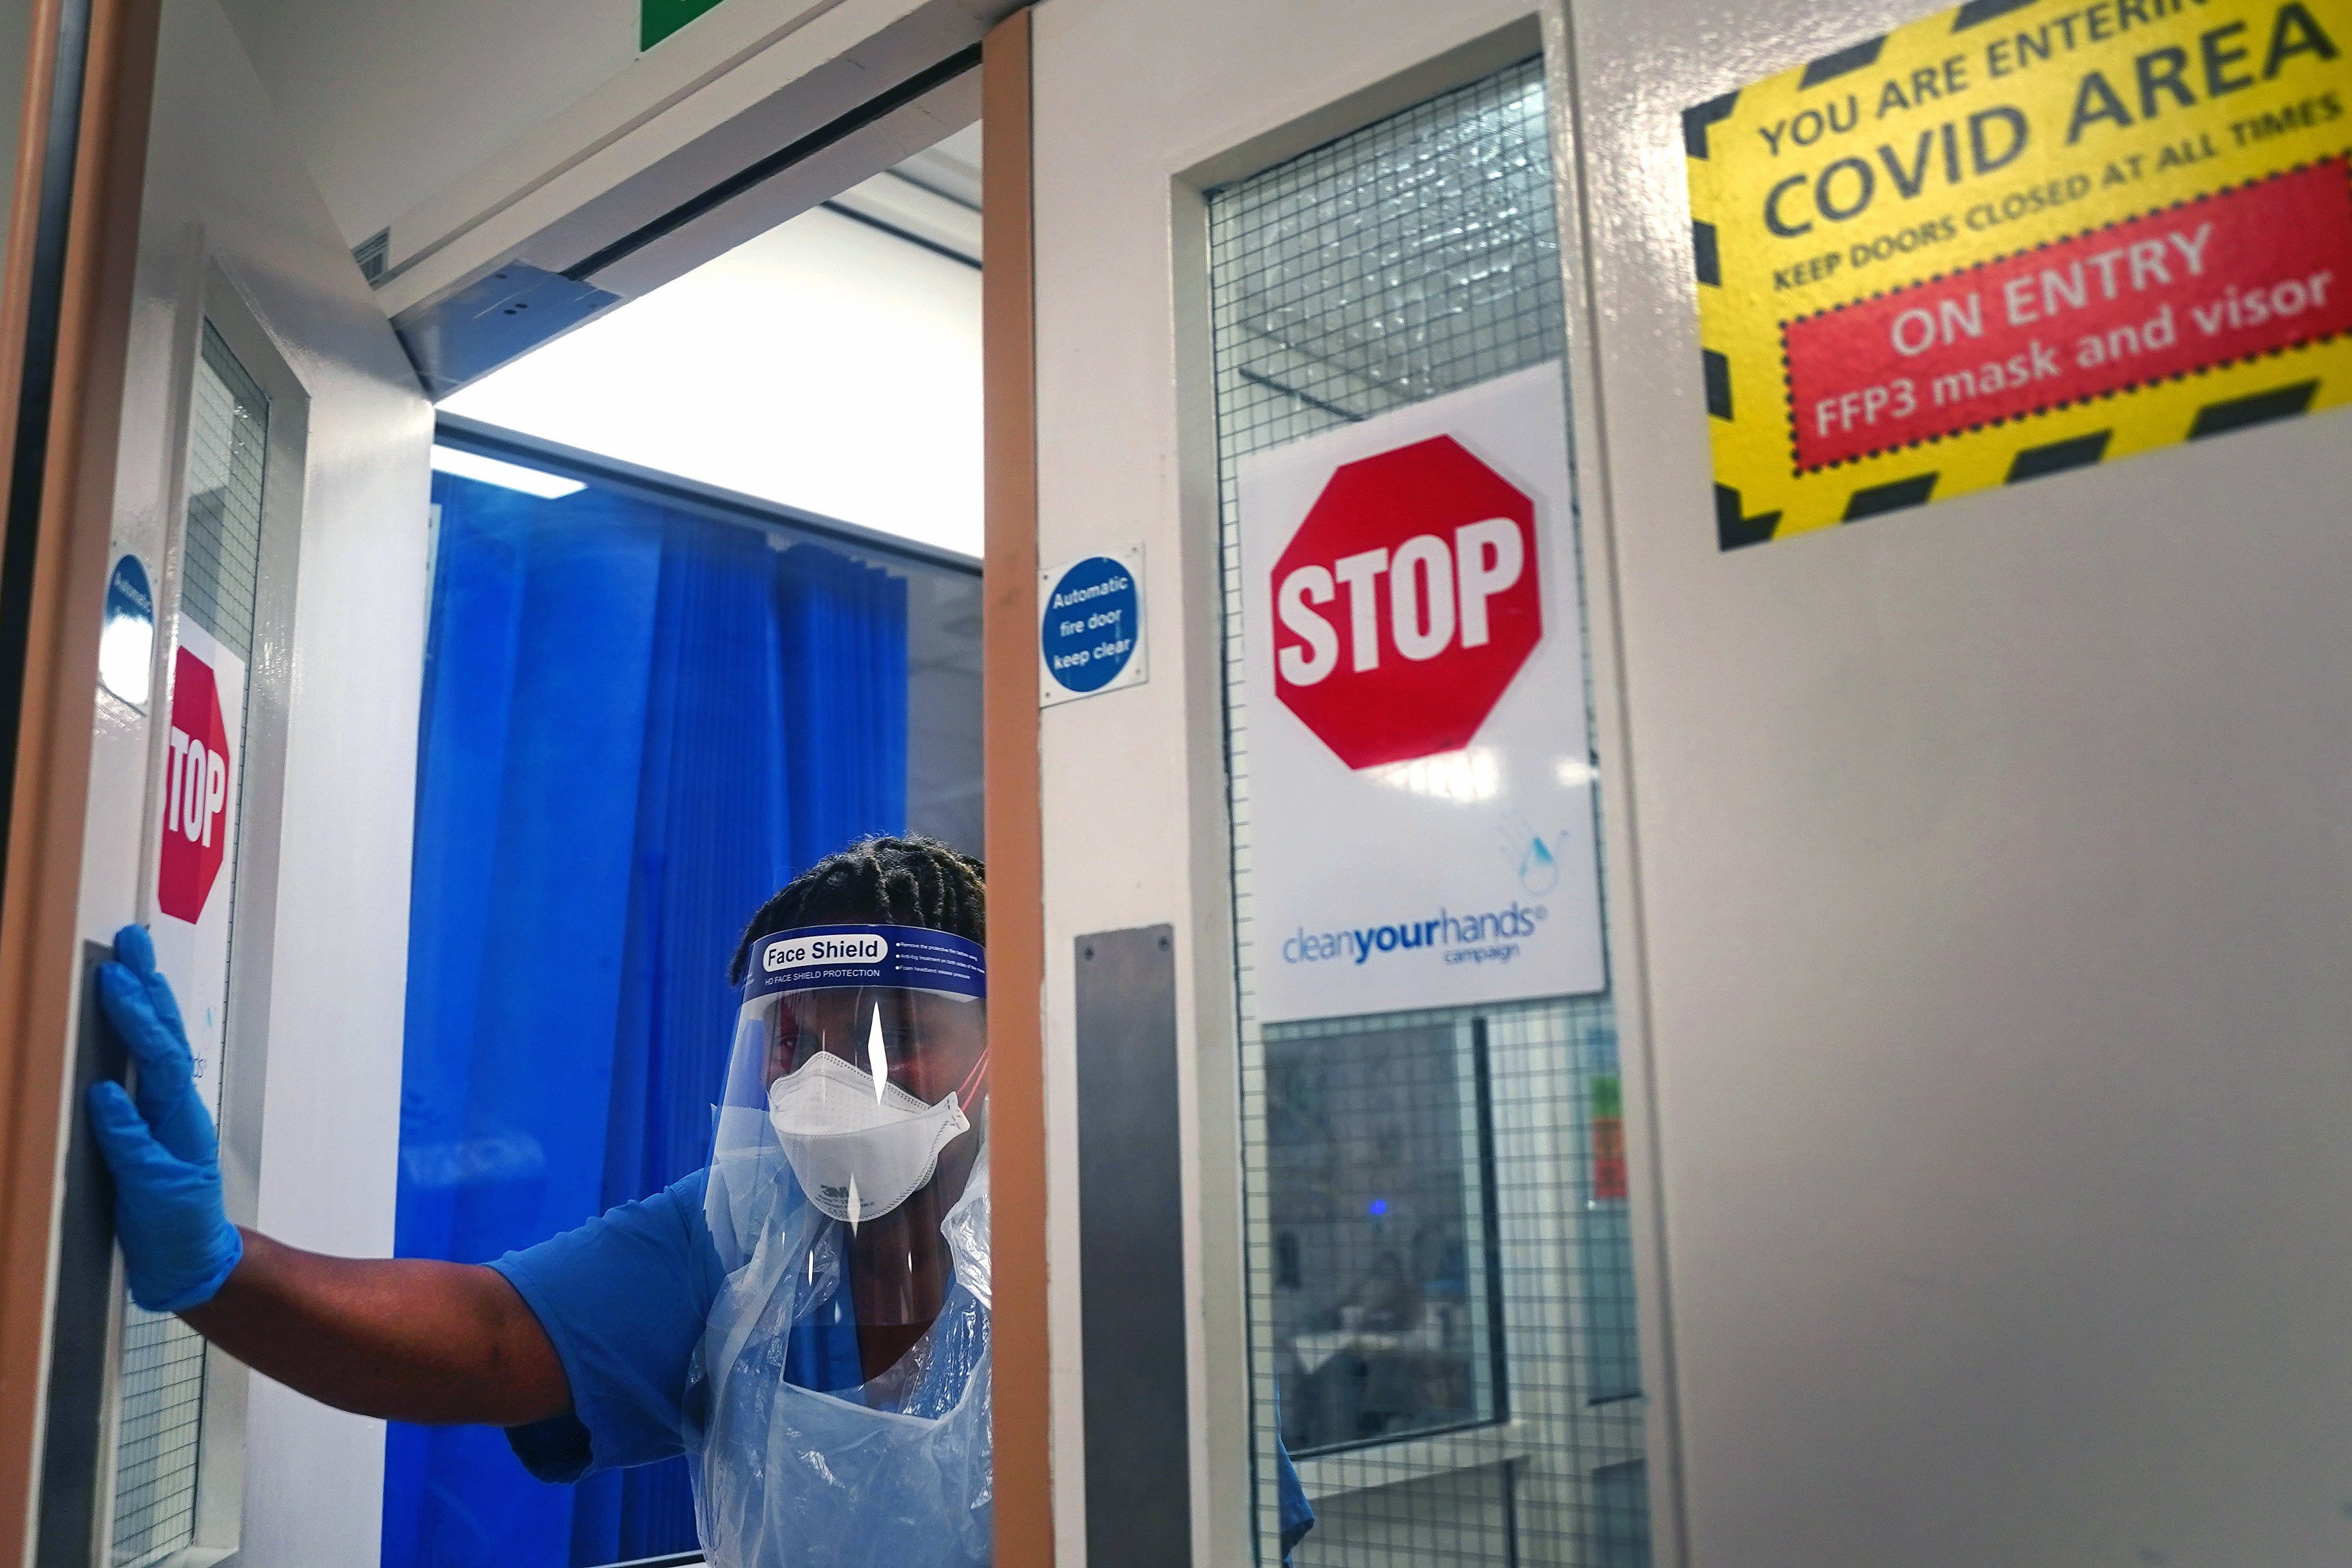 A member of staff wearing PPE walks through a ward for Covid-19 patients at King’s College Hospital in London (Victoria Jones/PA)